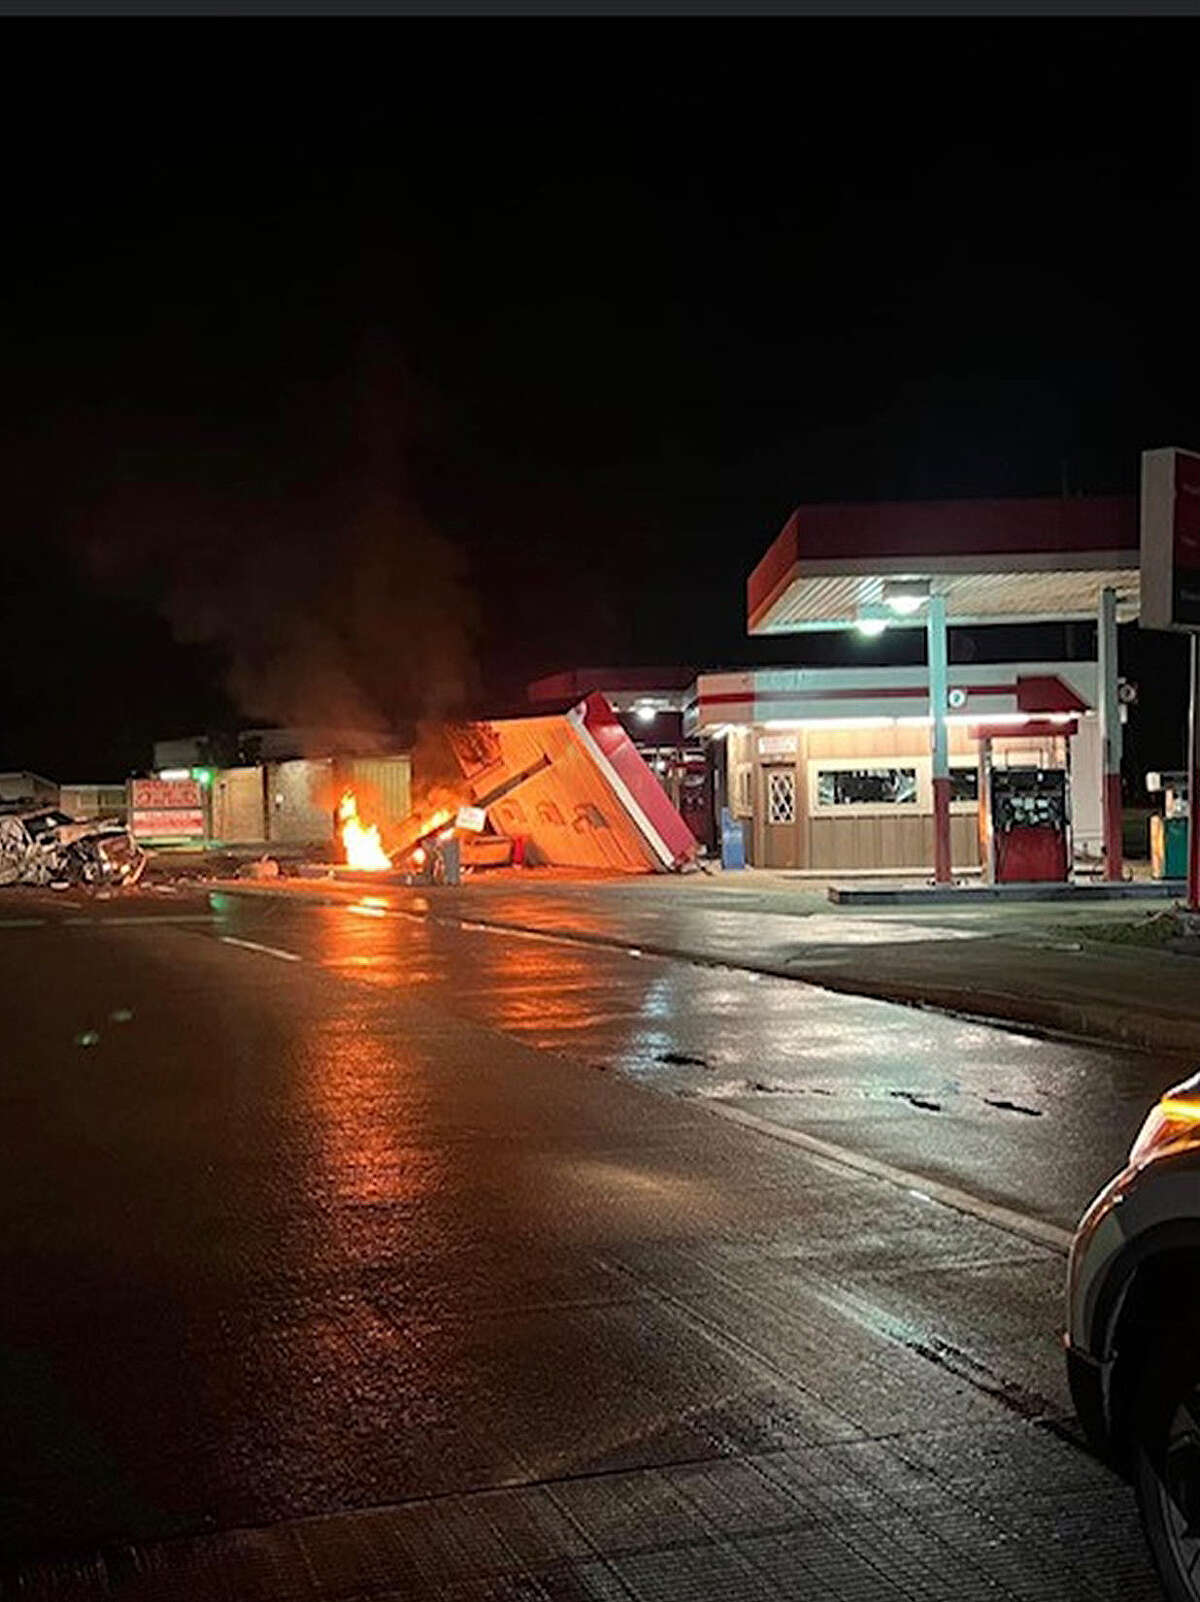 This photo was taken shortly after the vehicle plowed into the full-service pumps knocking them down and the awning. The fire was extinguished by Crosby firefighters shortly after.